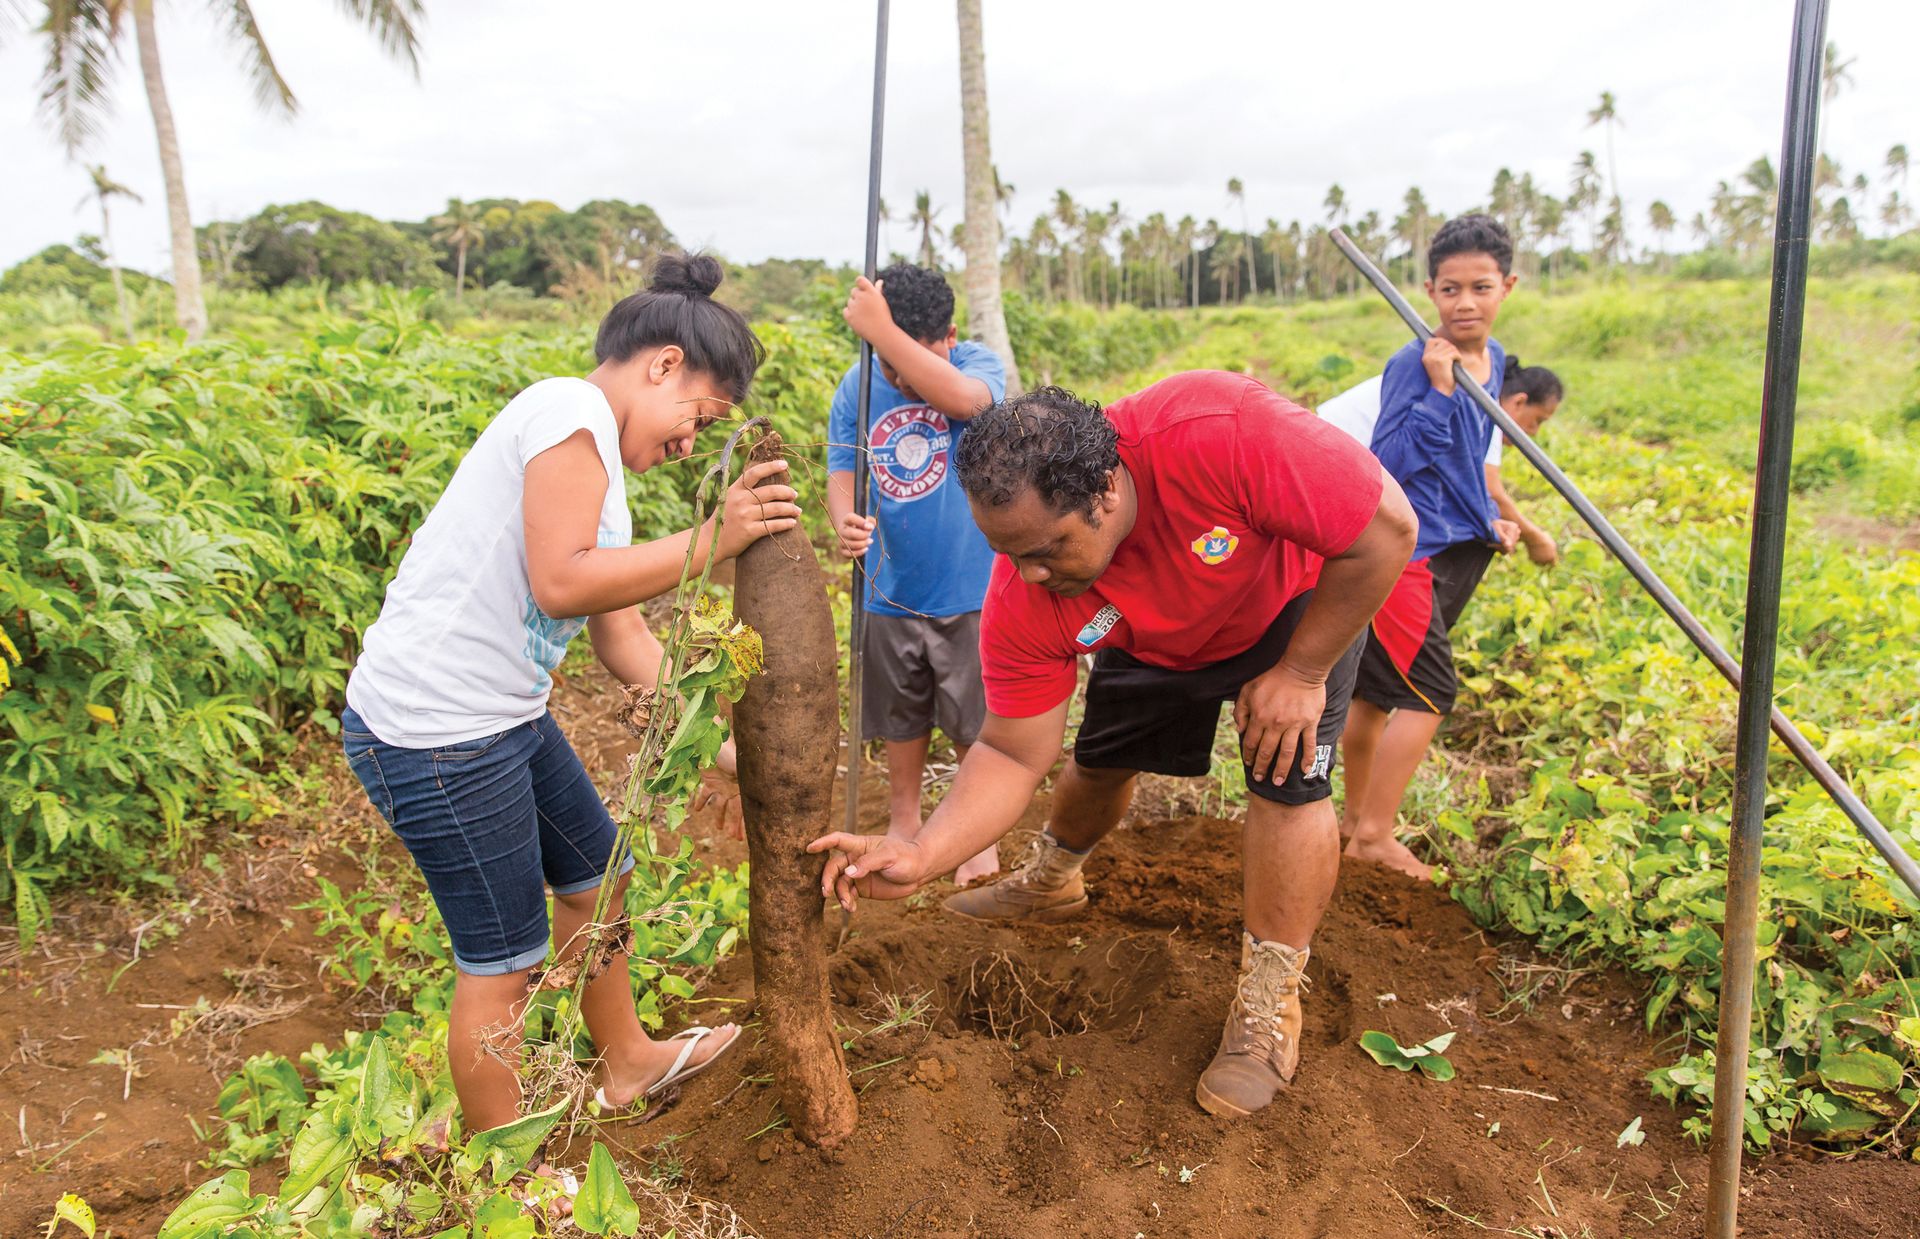 Feinga helps his children plant yams. Yams are a common crop in Tonga, and are often two or more feet in length.